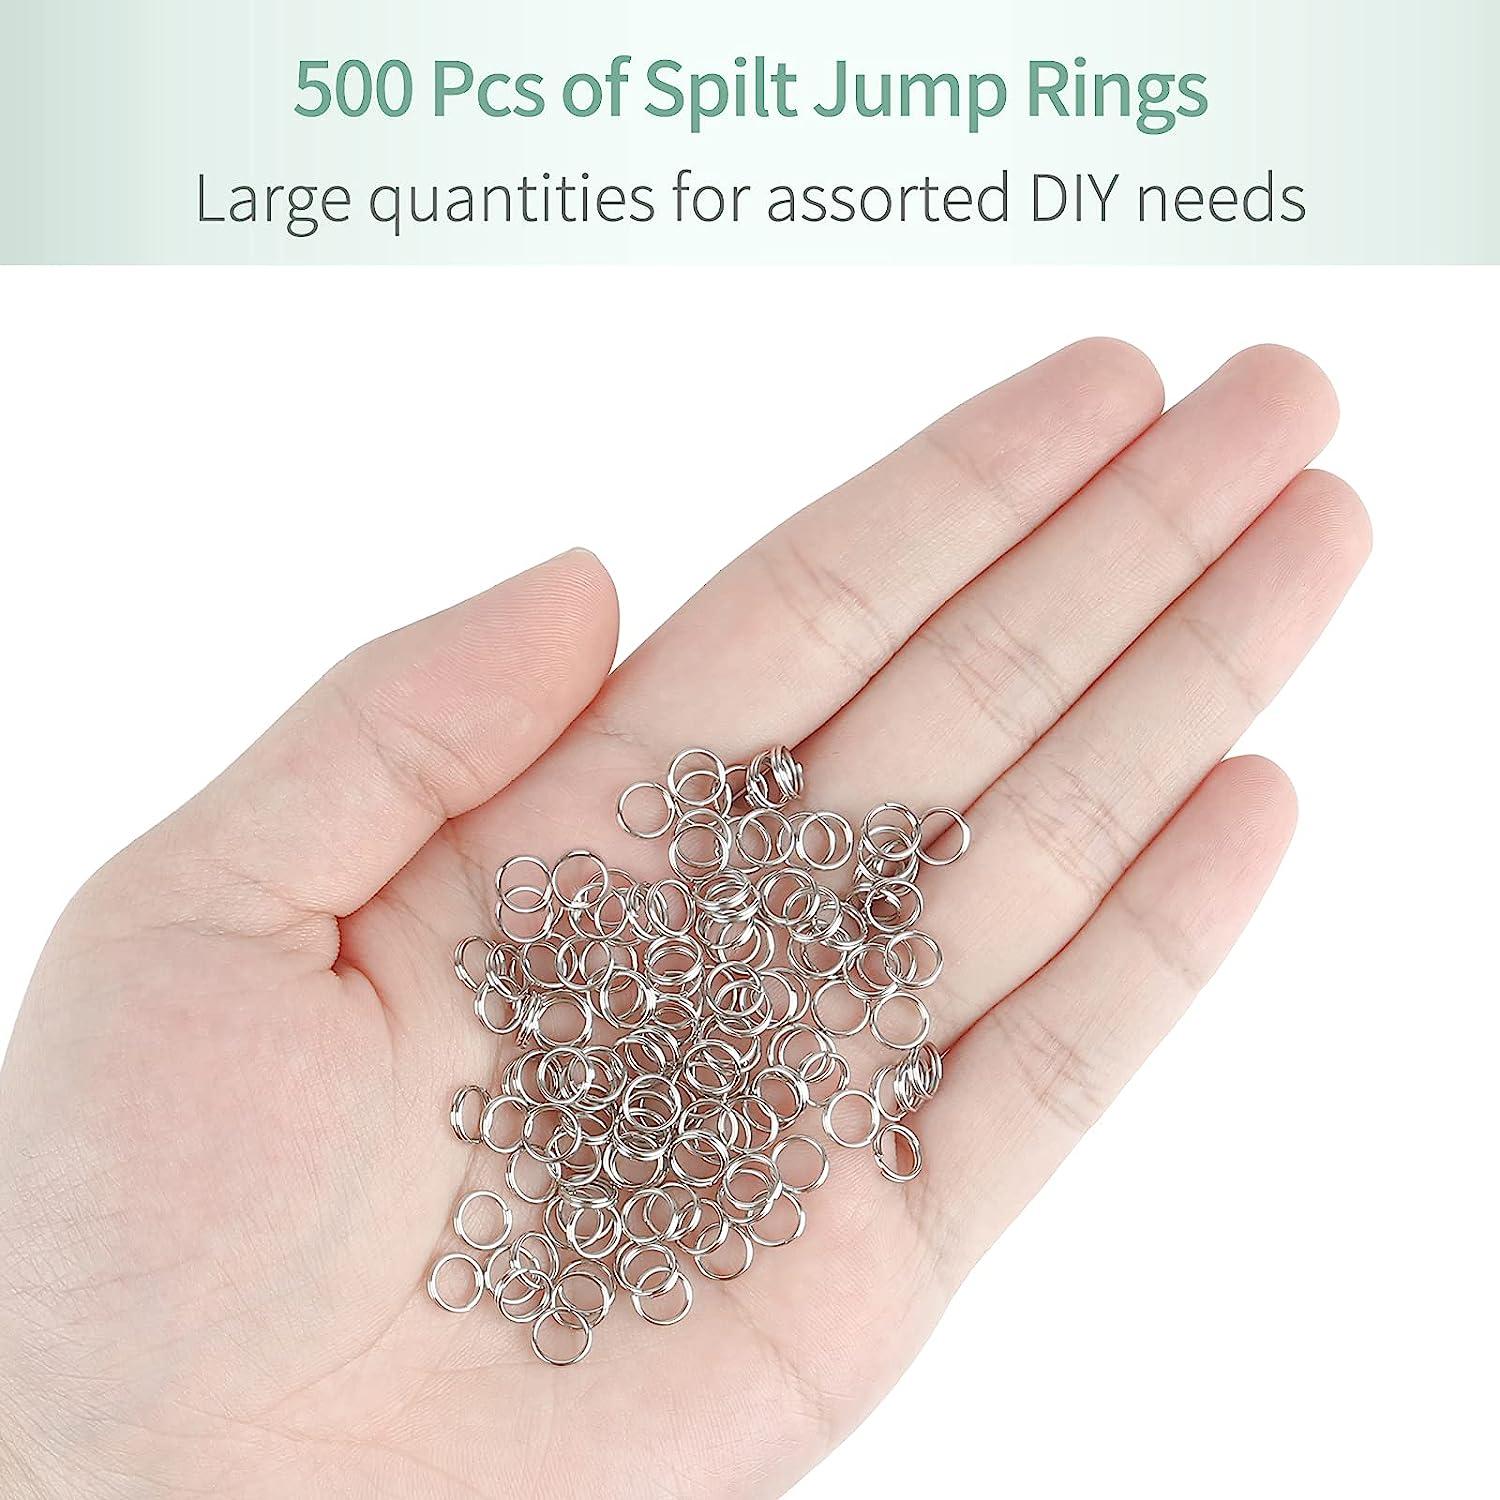  Uniclife 4 mm Silver Jump Rings for Jewelry Making